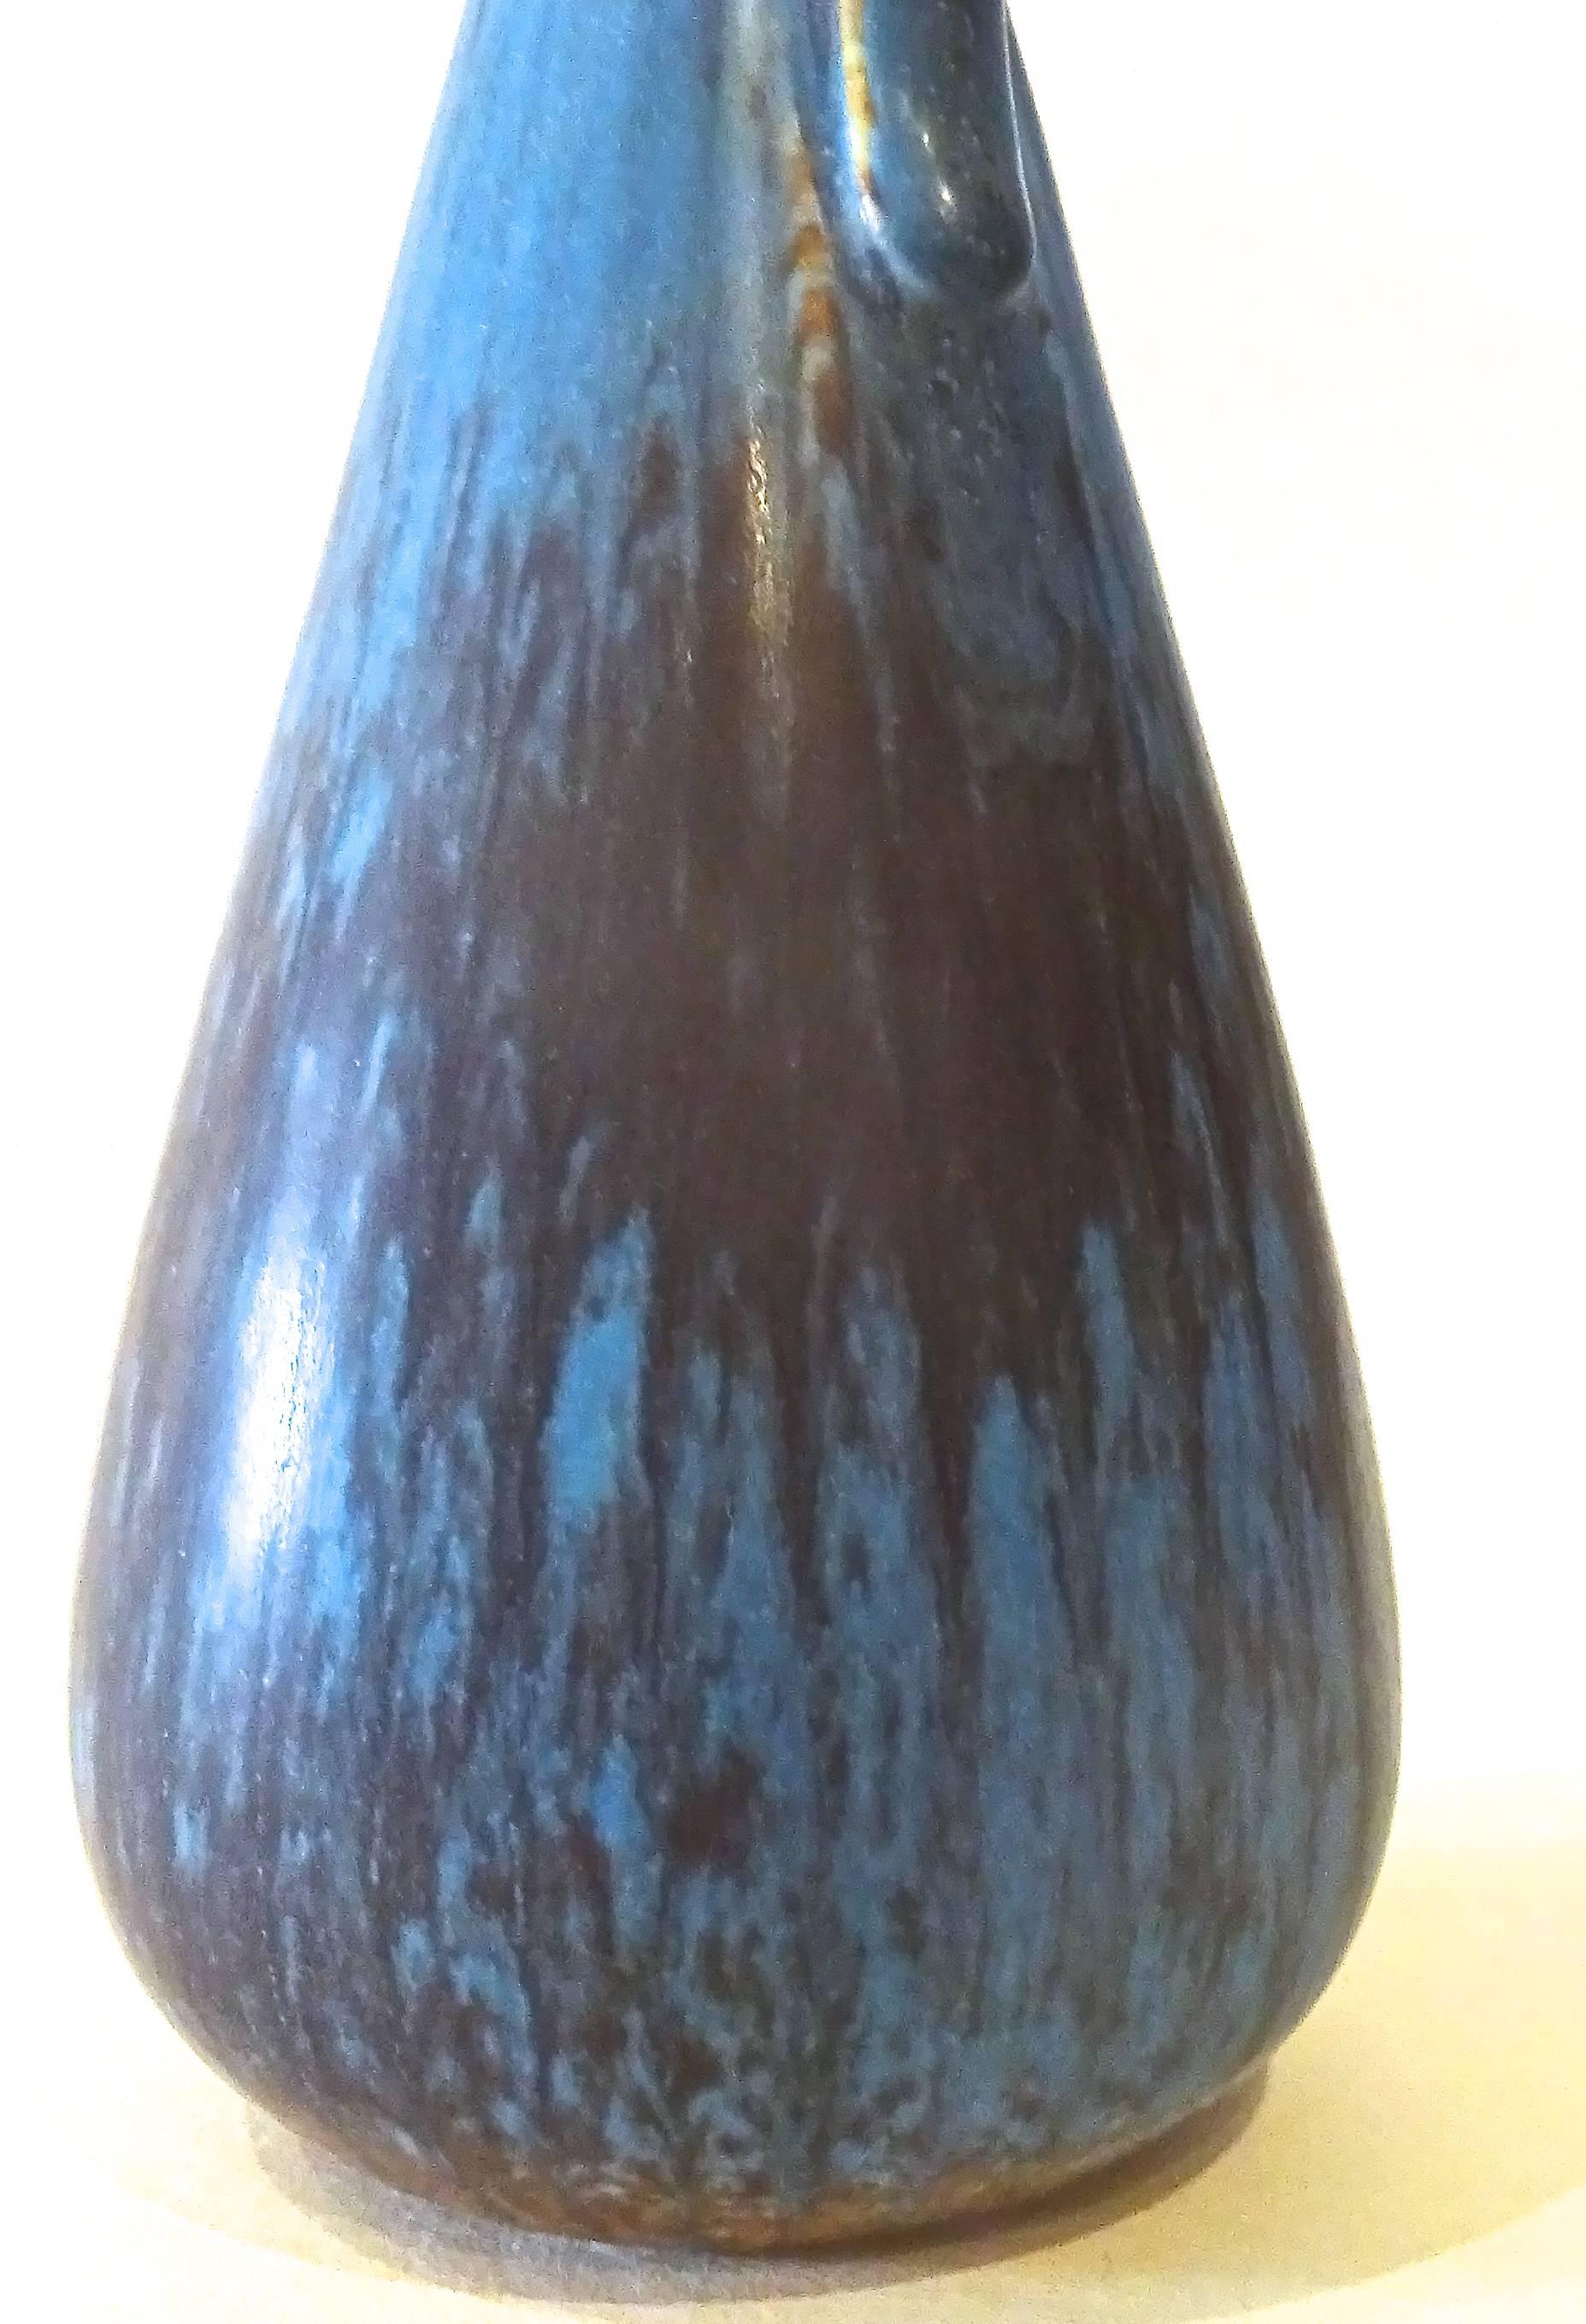 1950s Gunnar Nylund for Rorstrand Swedish Modern Art Pottery Vessel For Sale 1